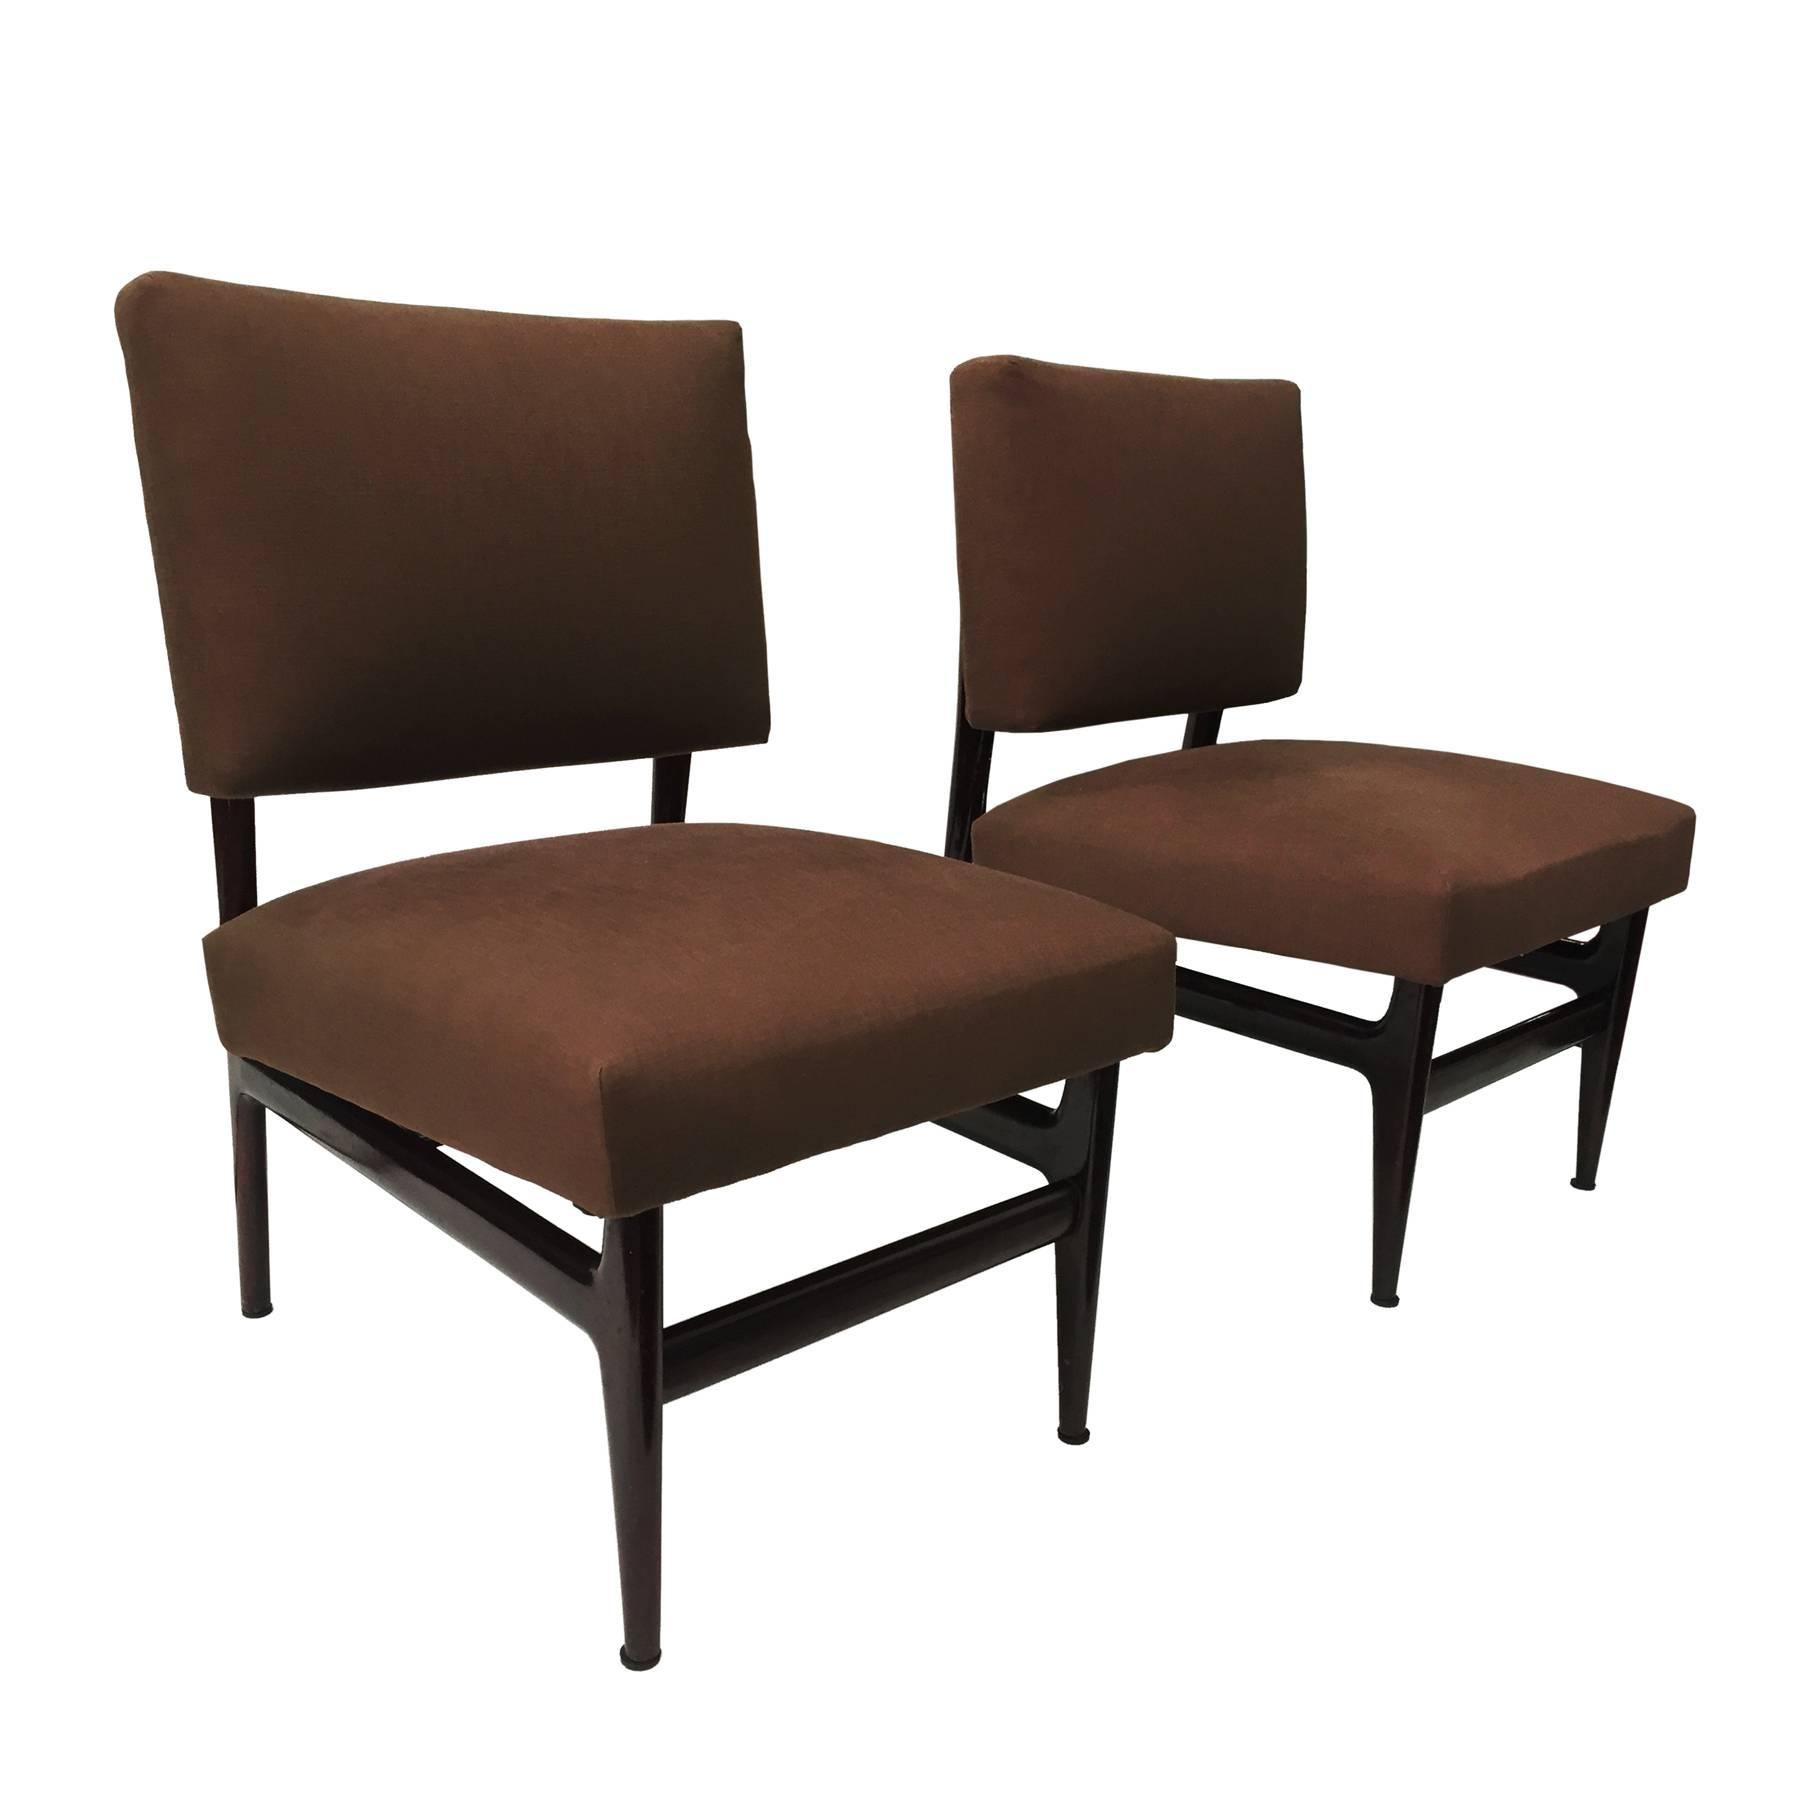 Italian Mid-Century Lounge Chairs by Vittorio Dassi, Set of Two, 1950s